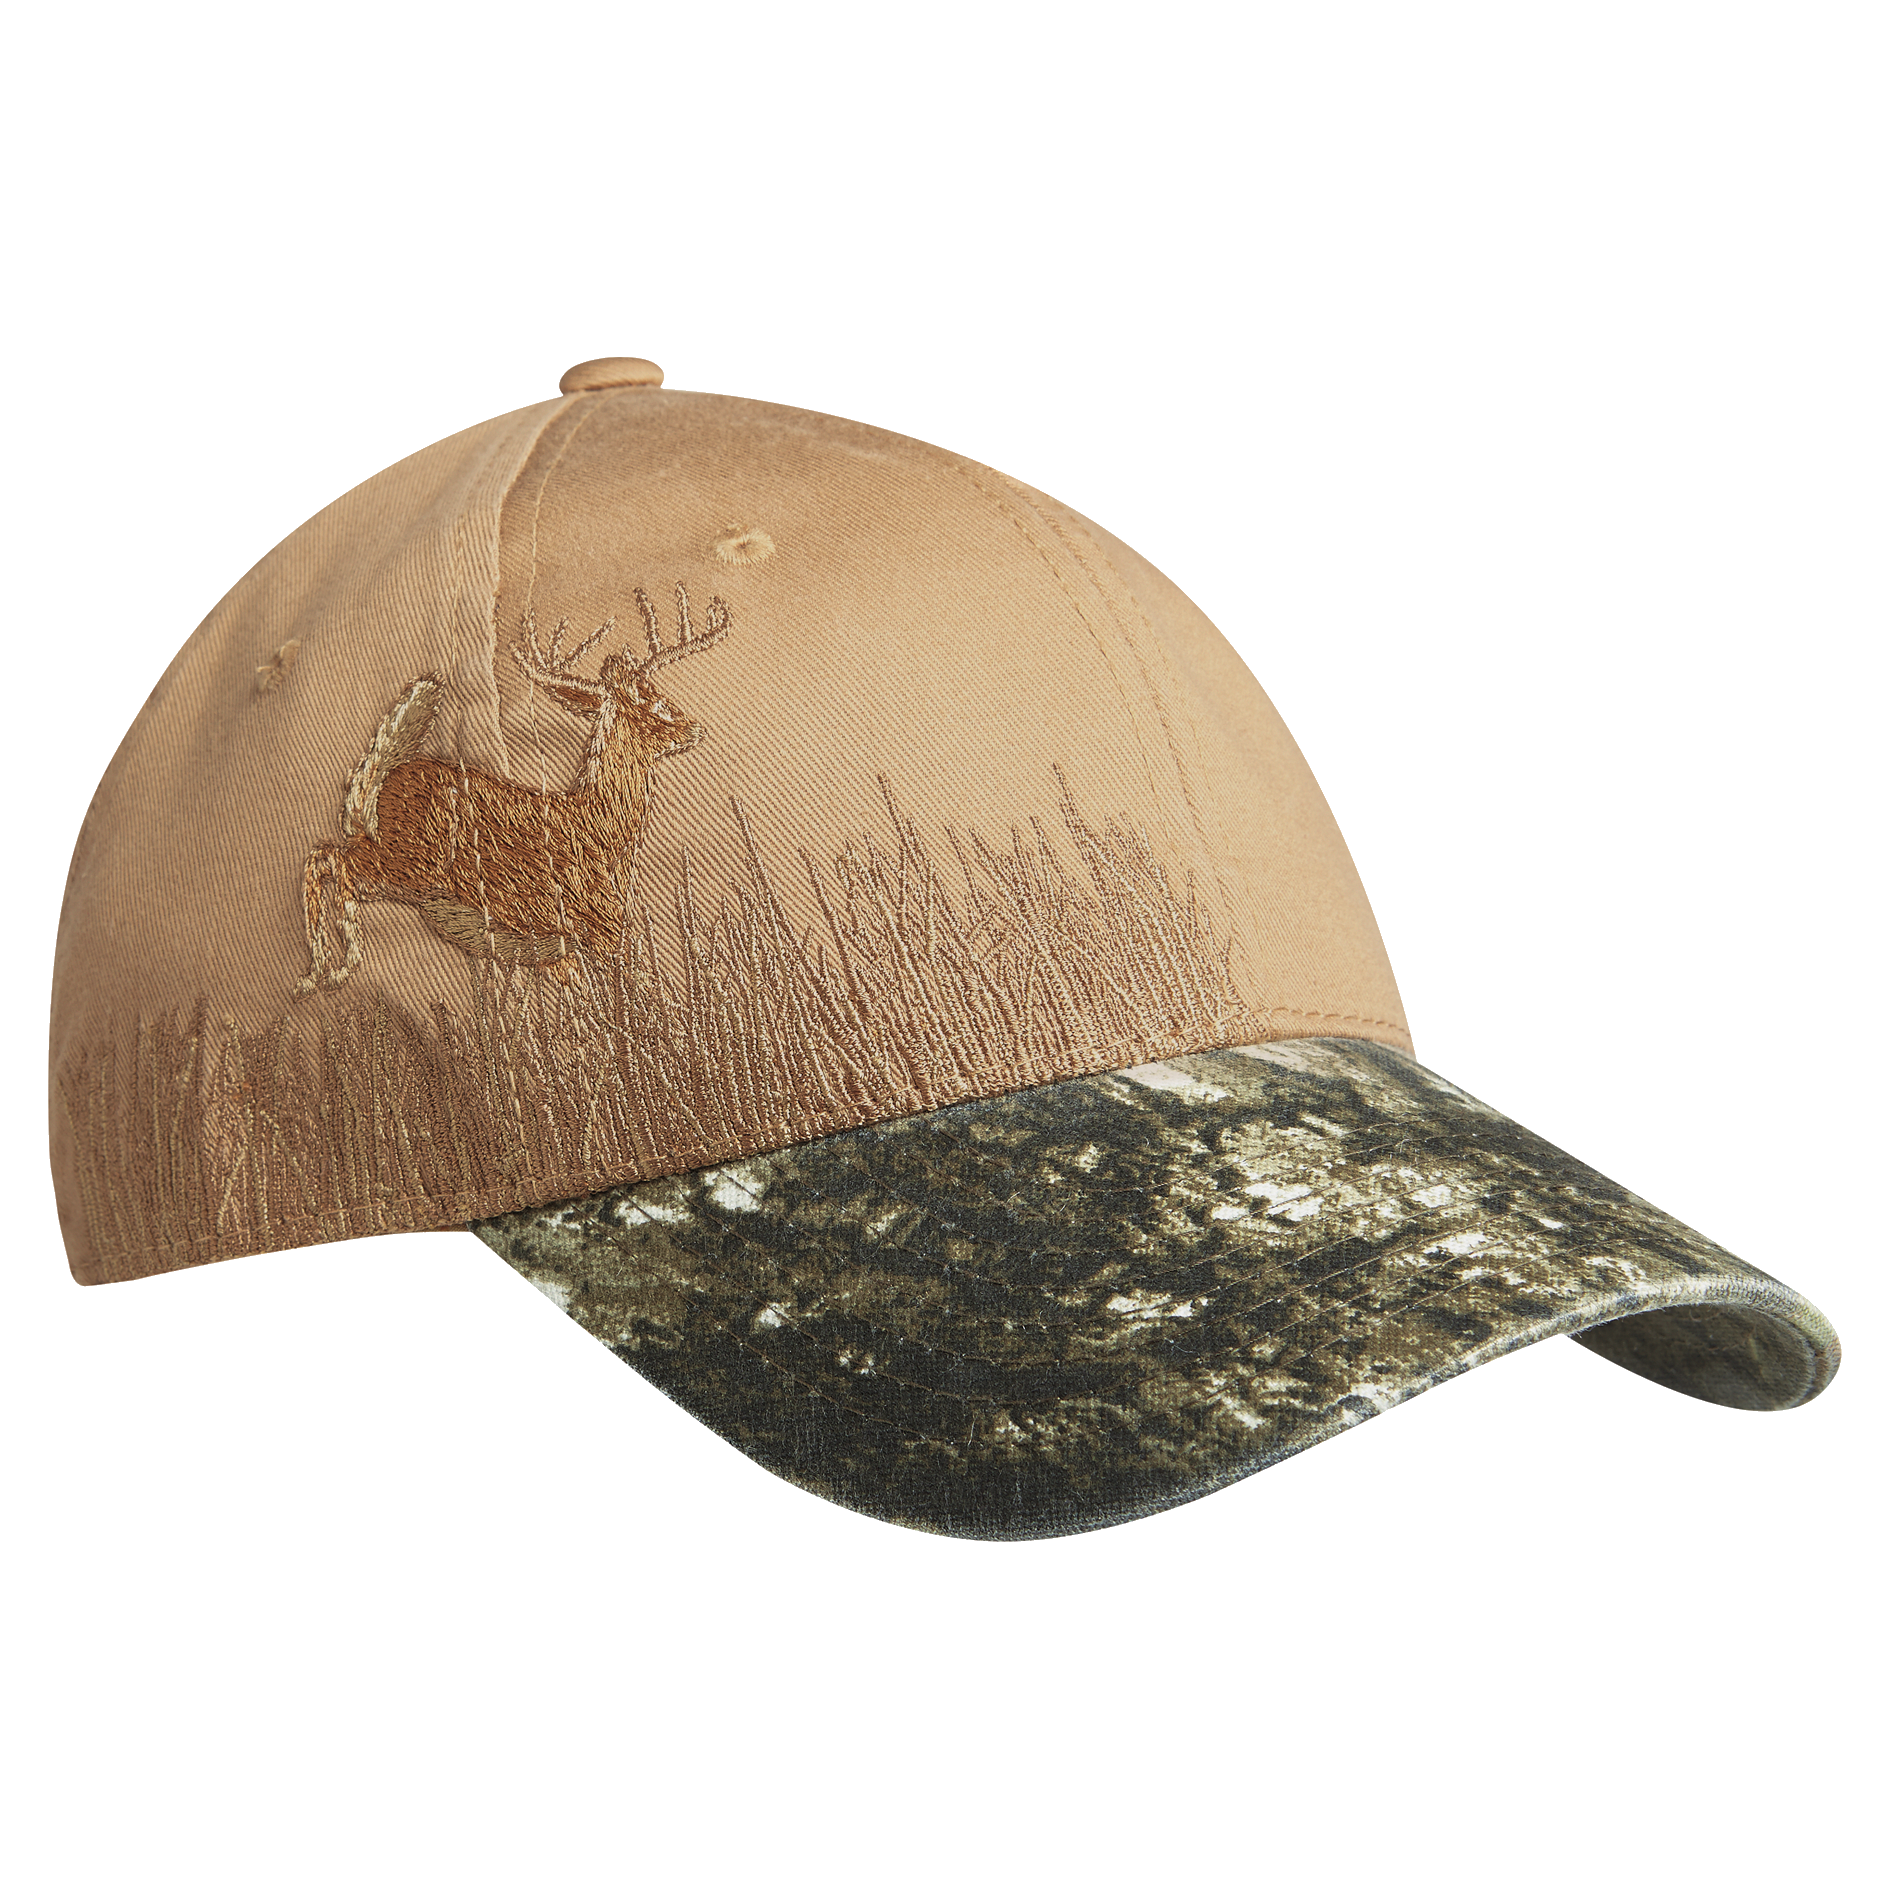 D1431 Embroidered Camouflage Cap